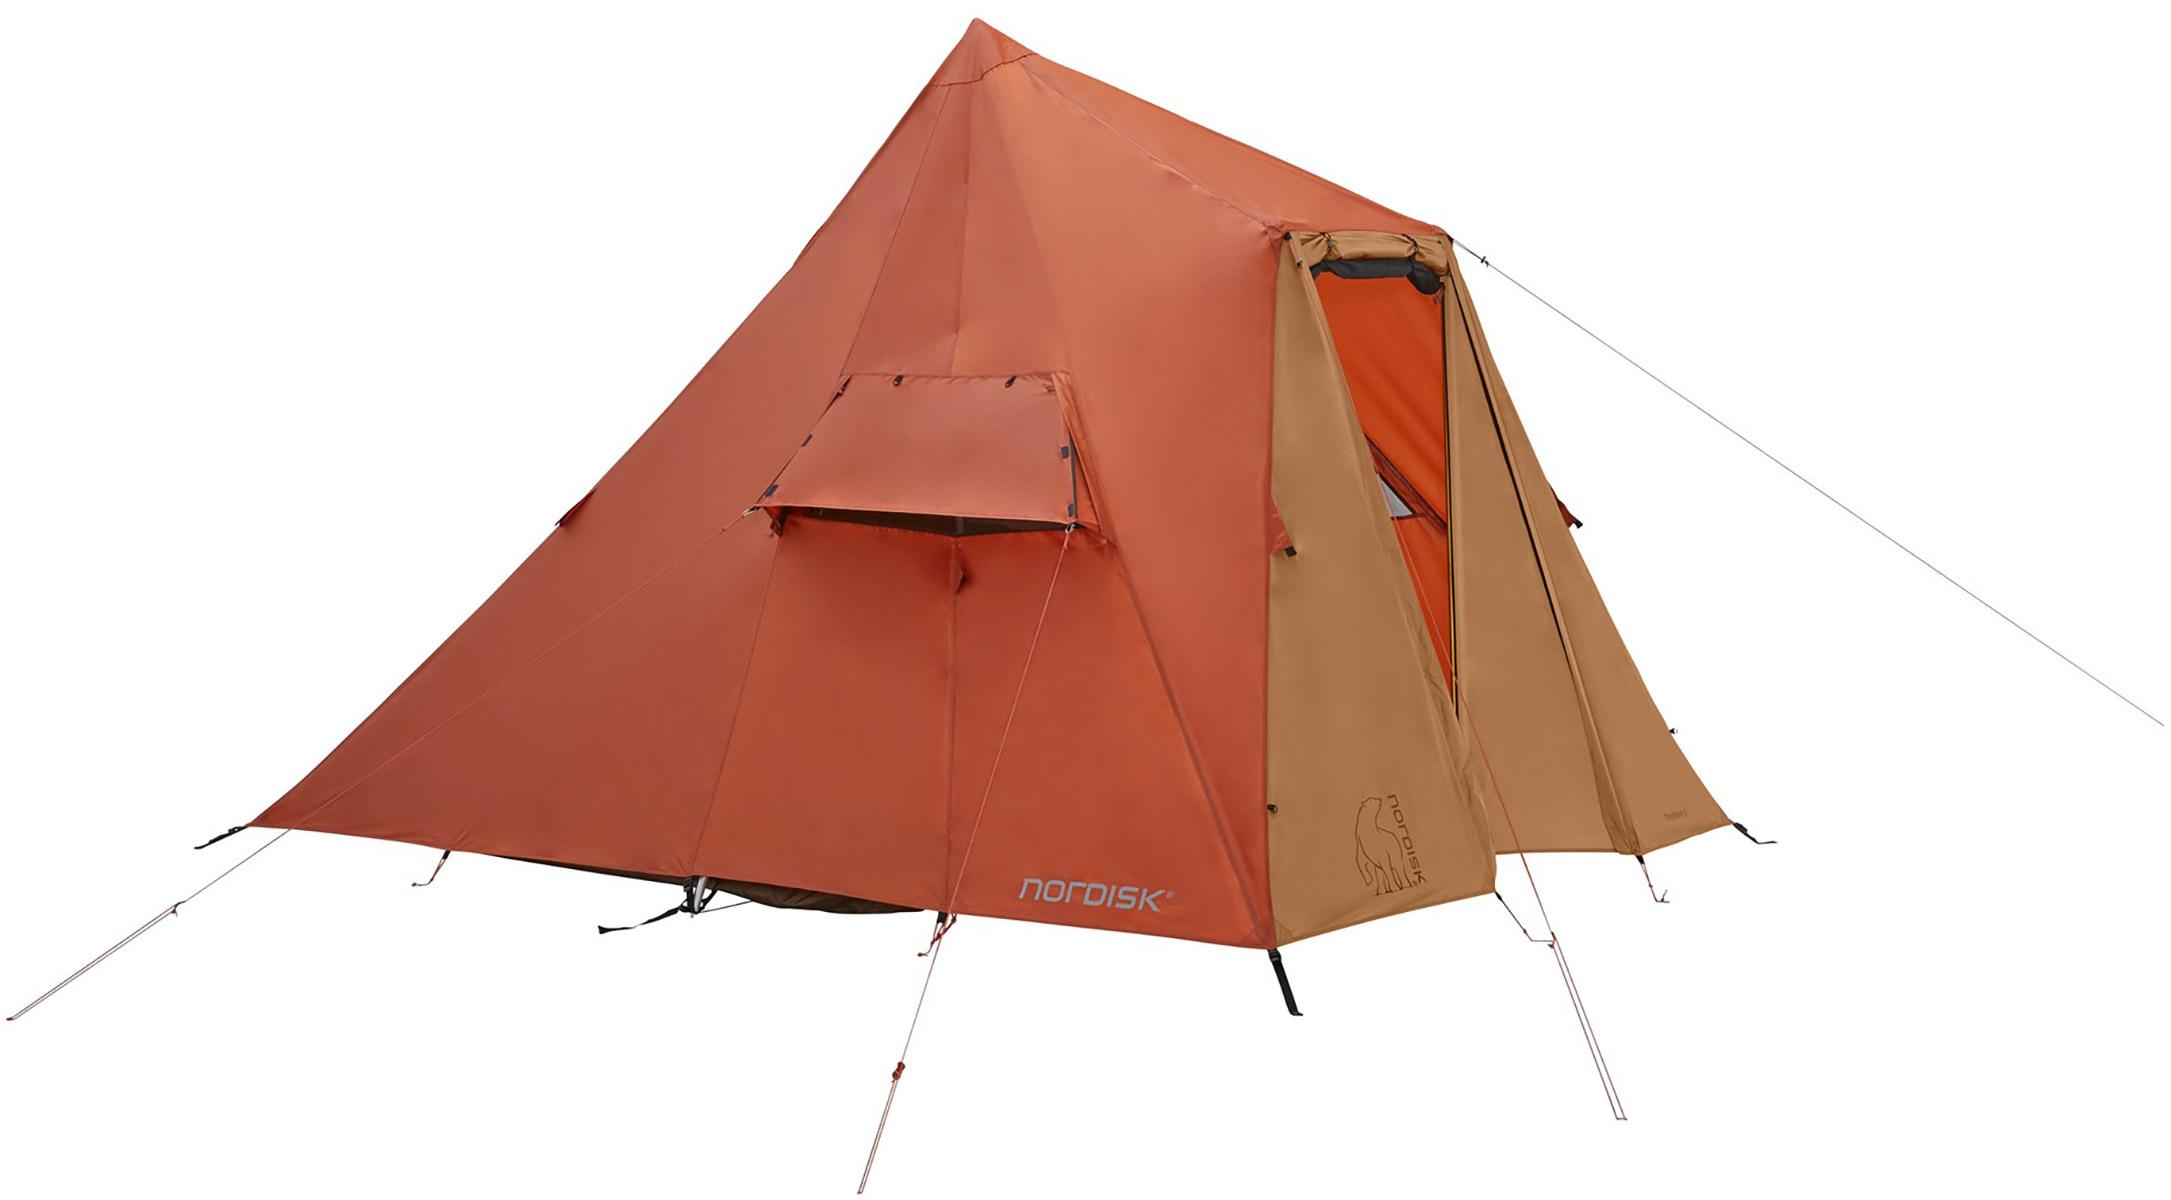 Nordisk Thrymheim 3 Square Tipi Tent - Picante/cashew